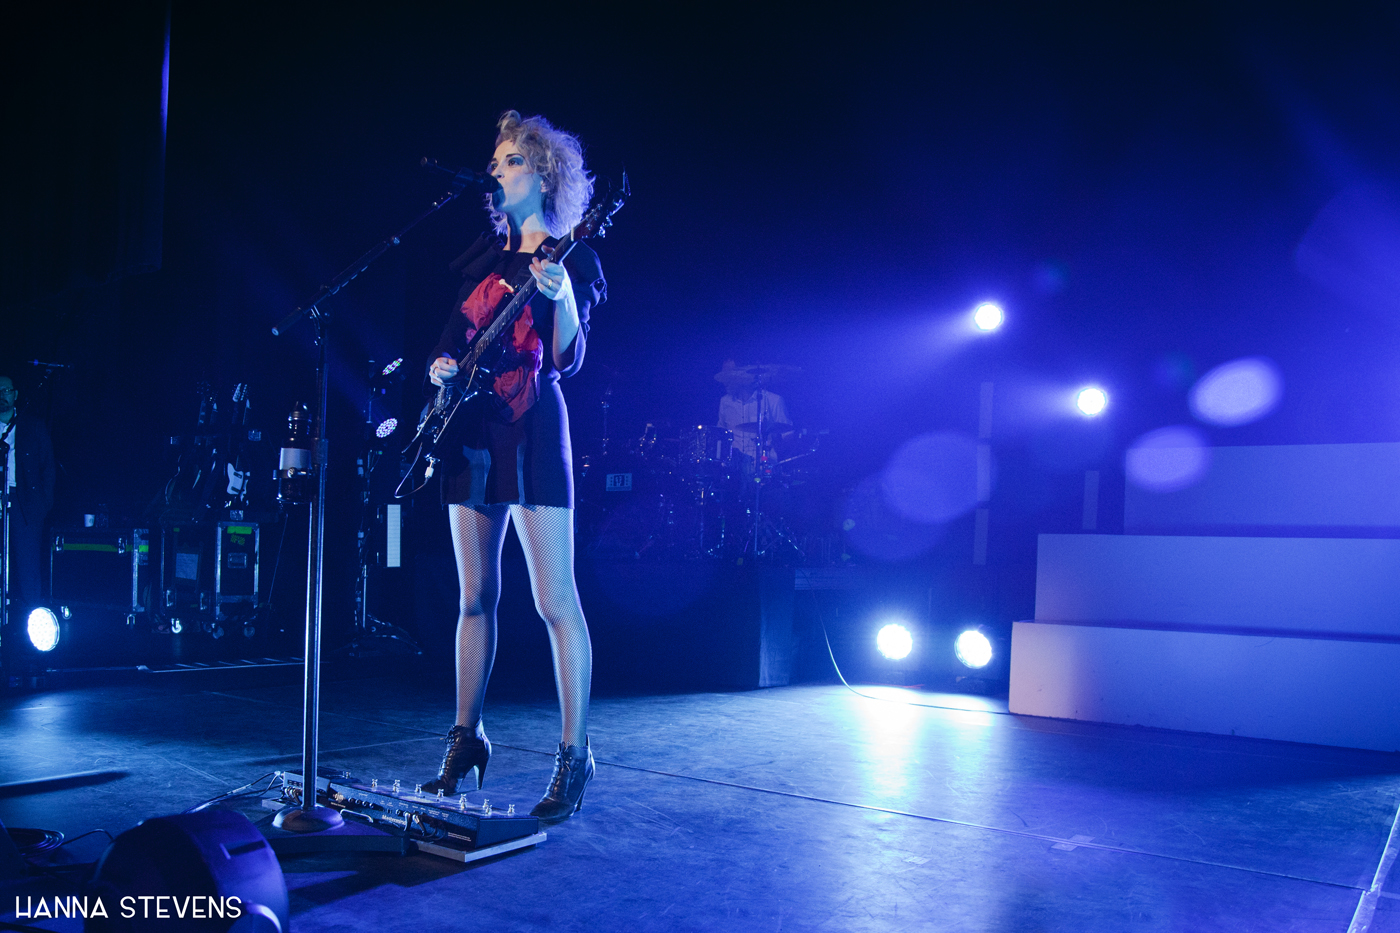 St Vincent Live at The Moore (Photo by Hanna Stevens)